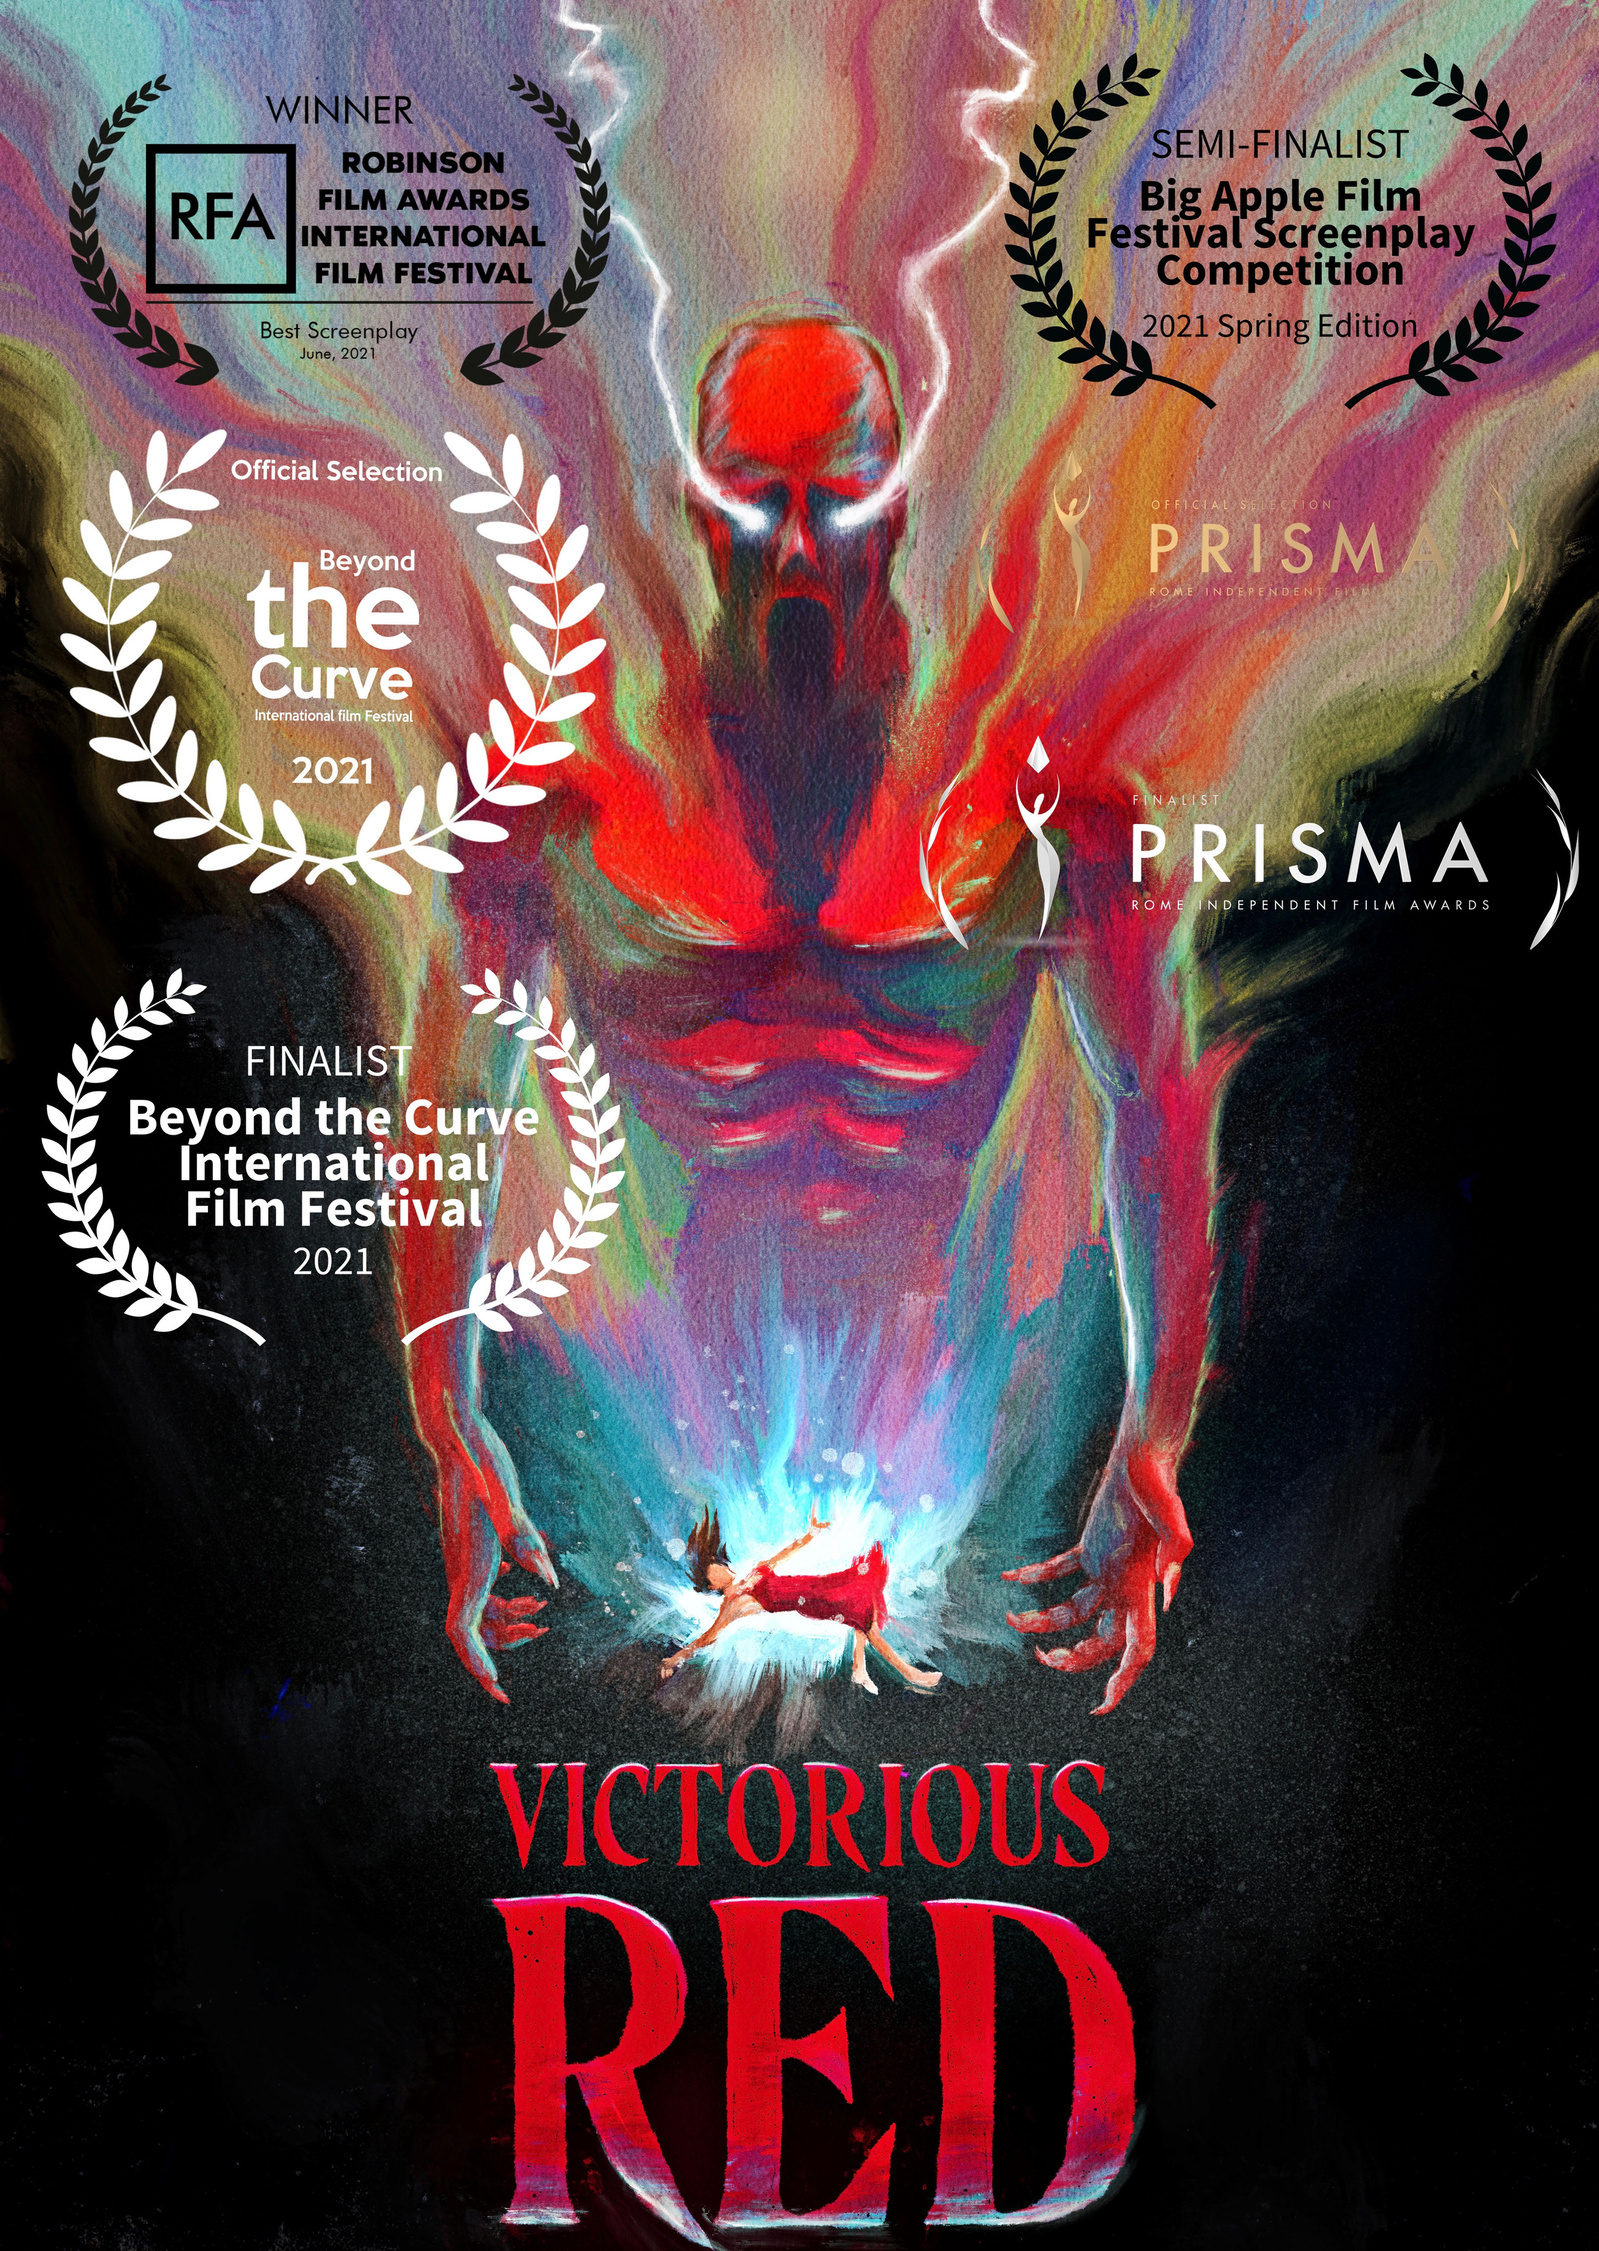 "Victorious Red" teaser poster with writing competition laurels. 